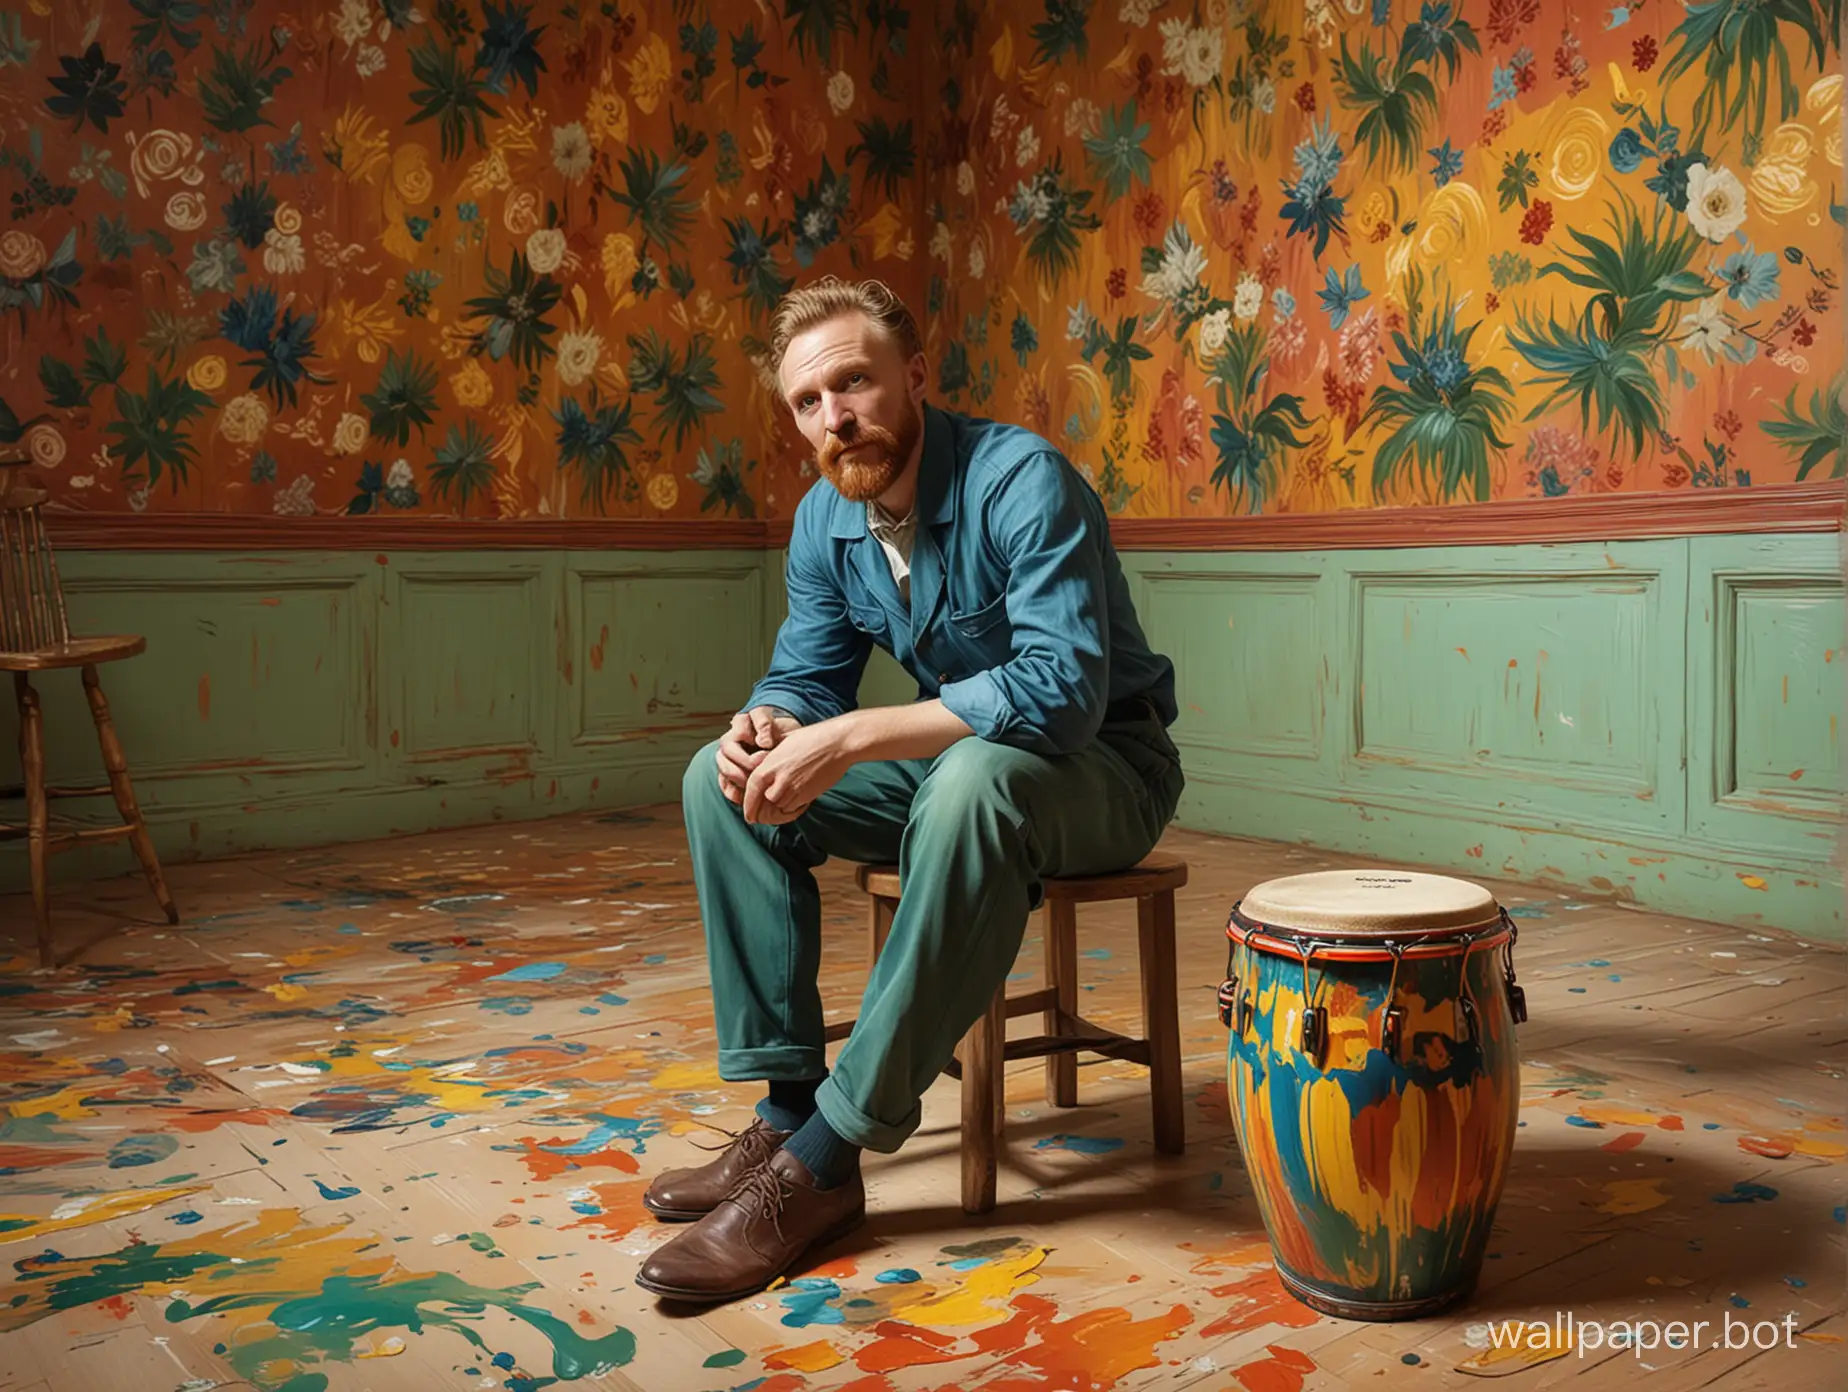 A whimsical and imaginative digital artwork featuring Vincent van Gogh, humorously renamed as "Vincent Bongo." He is depicted seated in a vibrantly painted room, surrounded by his iconic swirling patterns and color palettes. In a playful twist, he holds a pair of colorful bongo drums instead of his traditional paintbrushes. The room exudes the artist's signature style, with swirling brush strokes on the walls and floor. The overall atmosphere of the image is joyful and lighthearted, showcasing a new side to the famous painter.